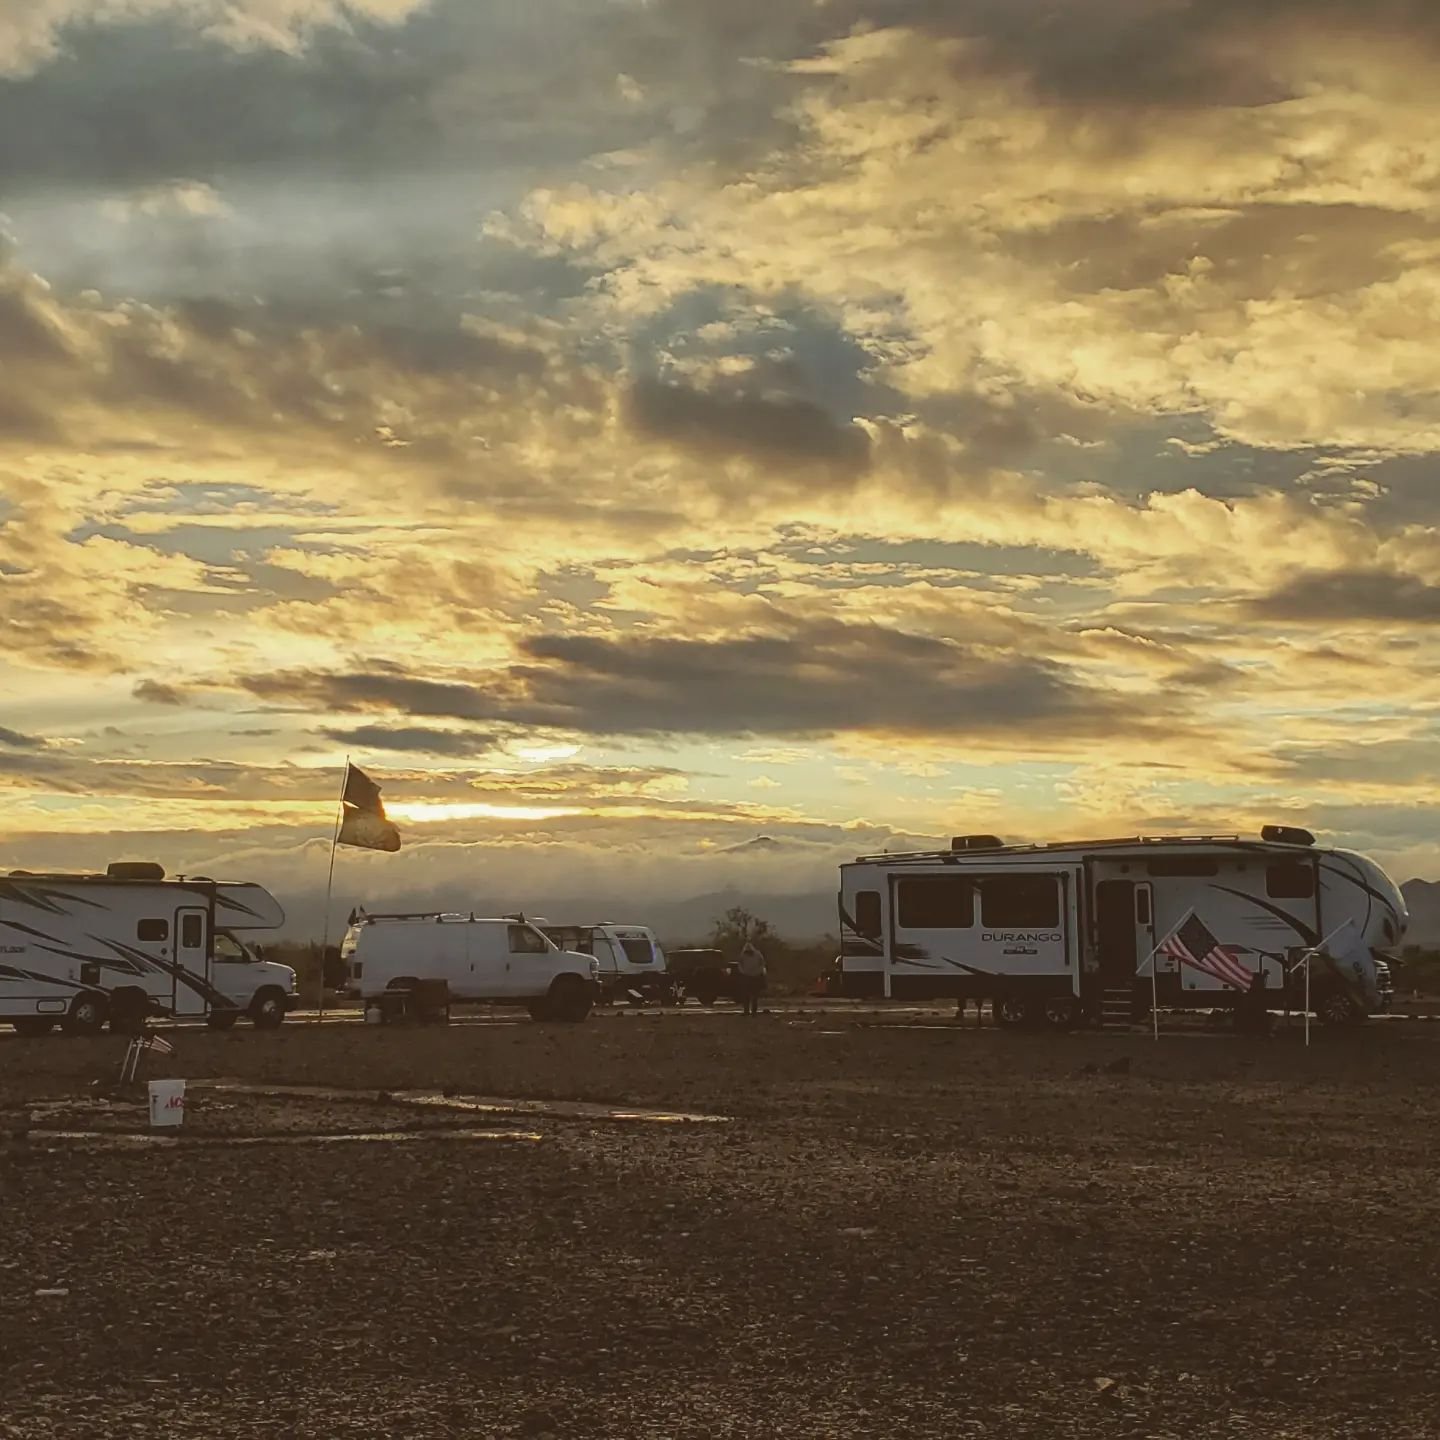 Another beautiful Q24 sunset, this time after the rain. Desert sunsets absolutely never get old, and the vibe out here is life giving.
.
.
.
.
#livingourjourney365 #nomadicroadtravels #homeonwheels #rvlifestyle #nomads #modernrv #rvtoday #fulltimervl